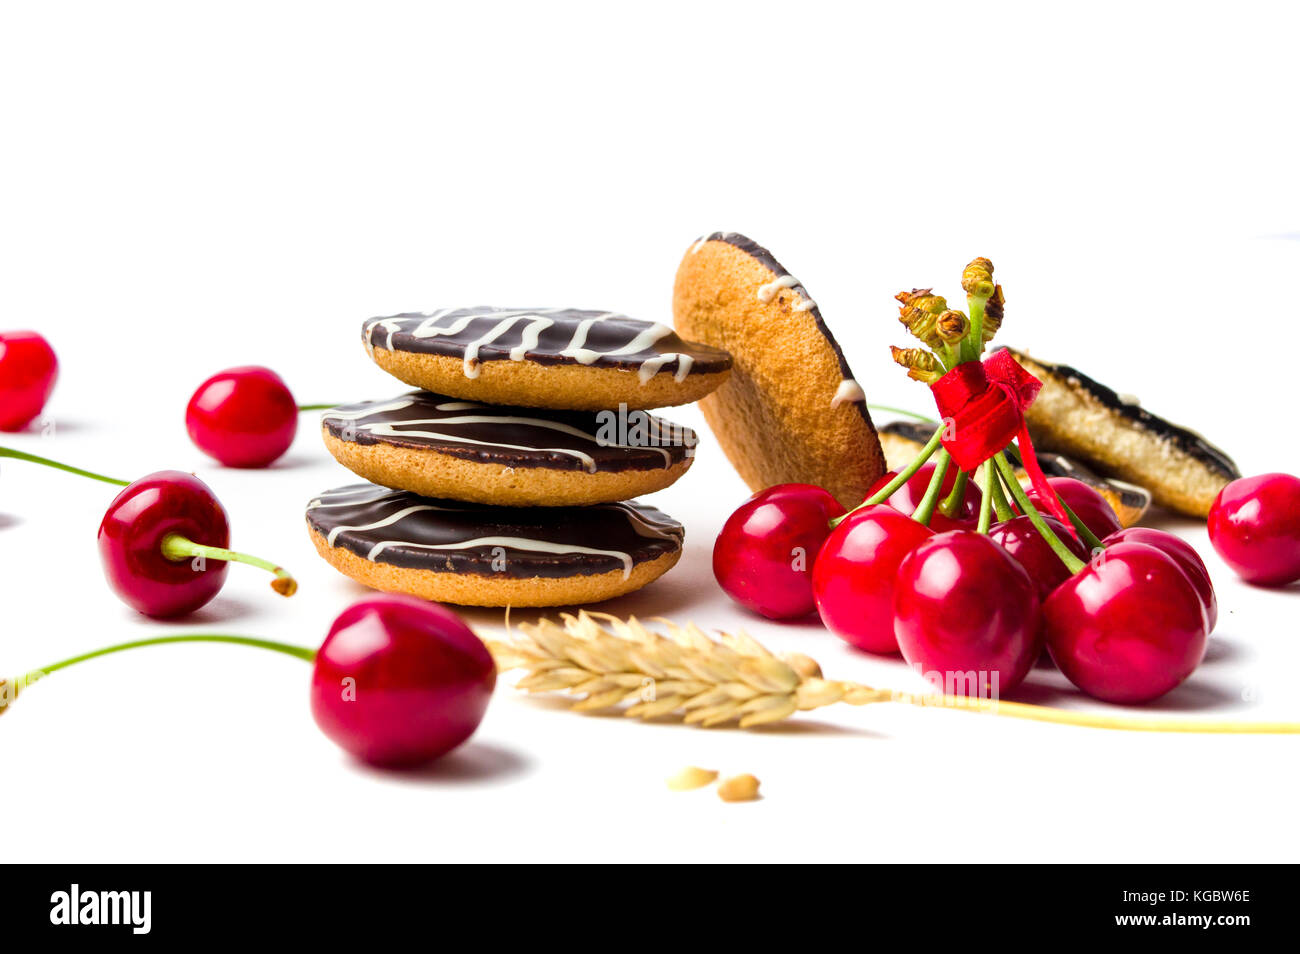 Biscuits et fruits cerise isolated on white Banque D'Images